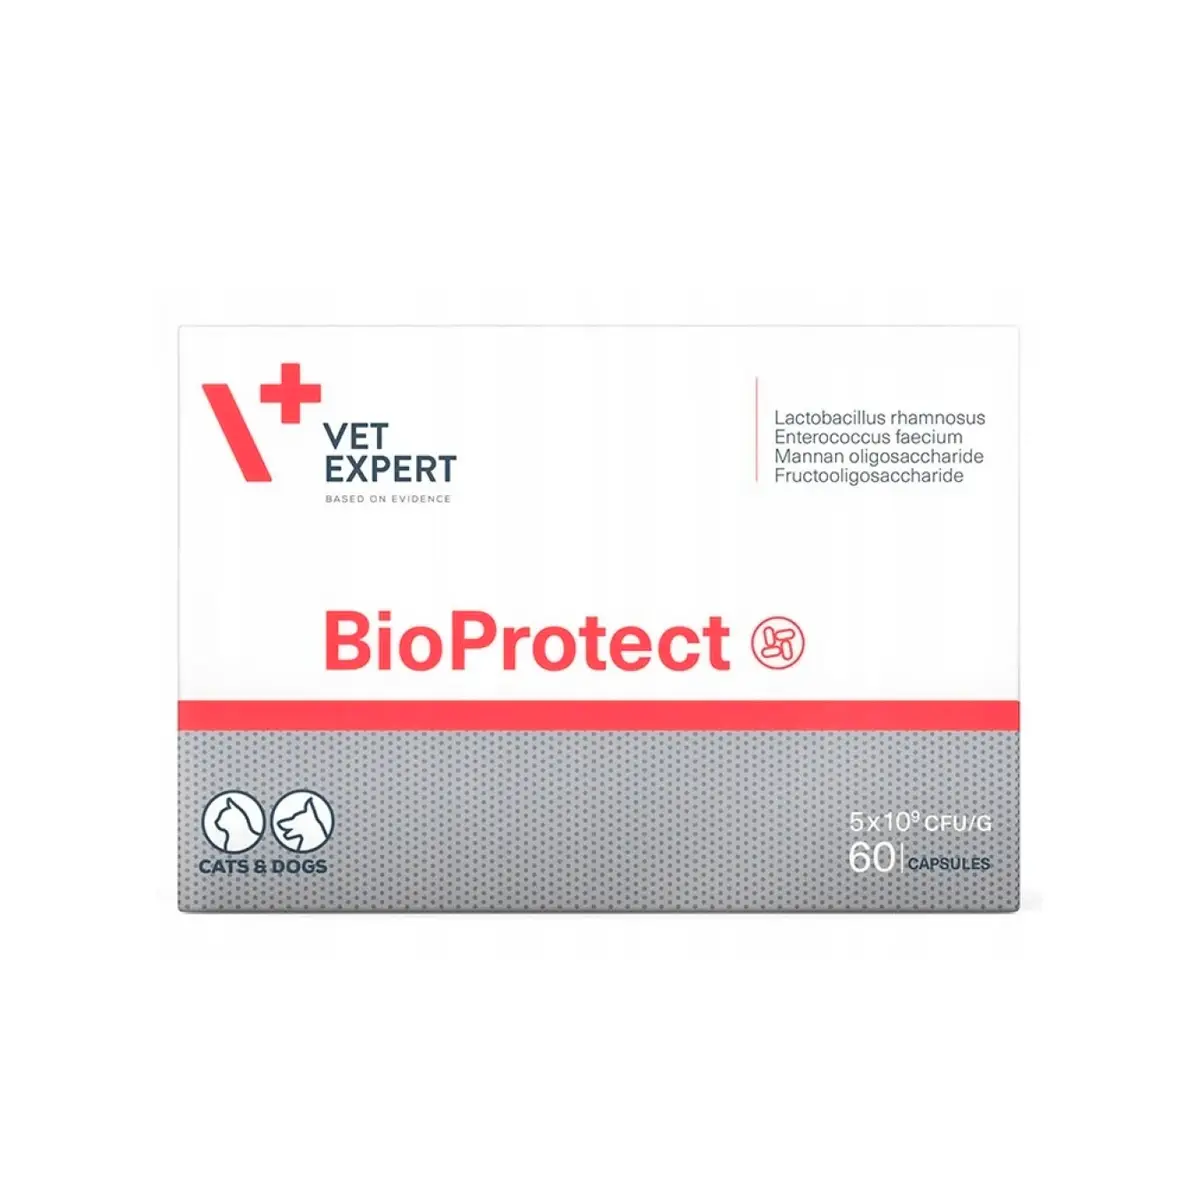 BioProtect (Intestinal Supplement for Dogs & Cats) 60 caps